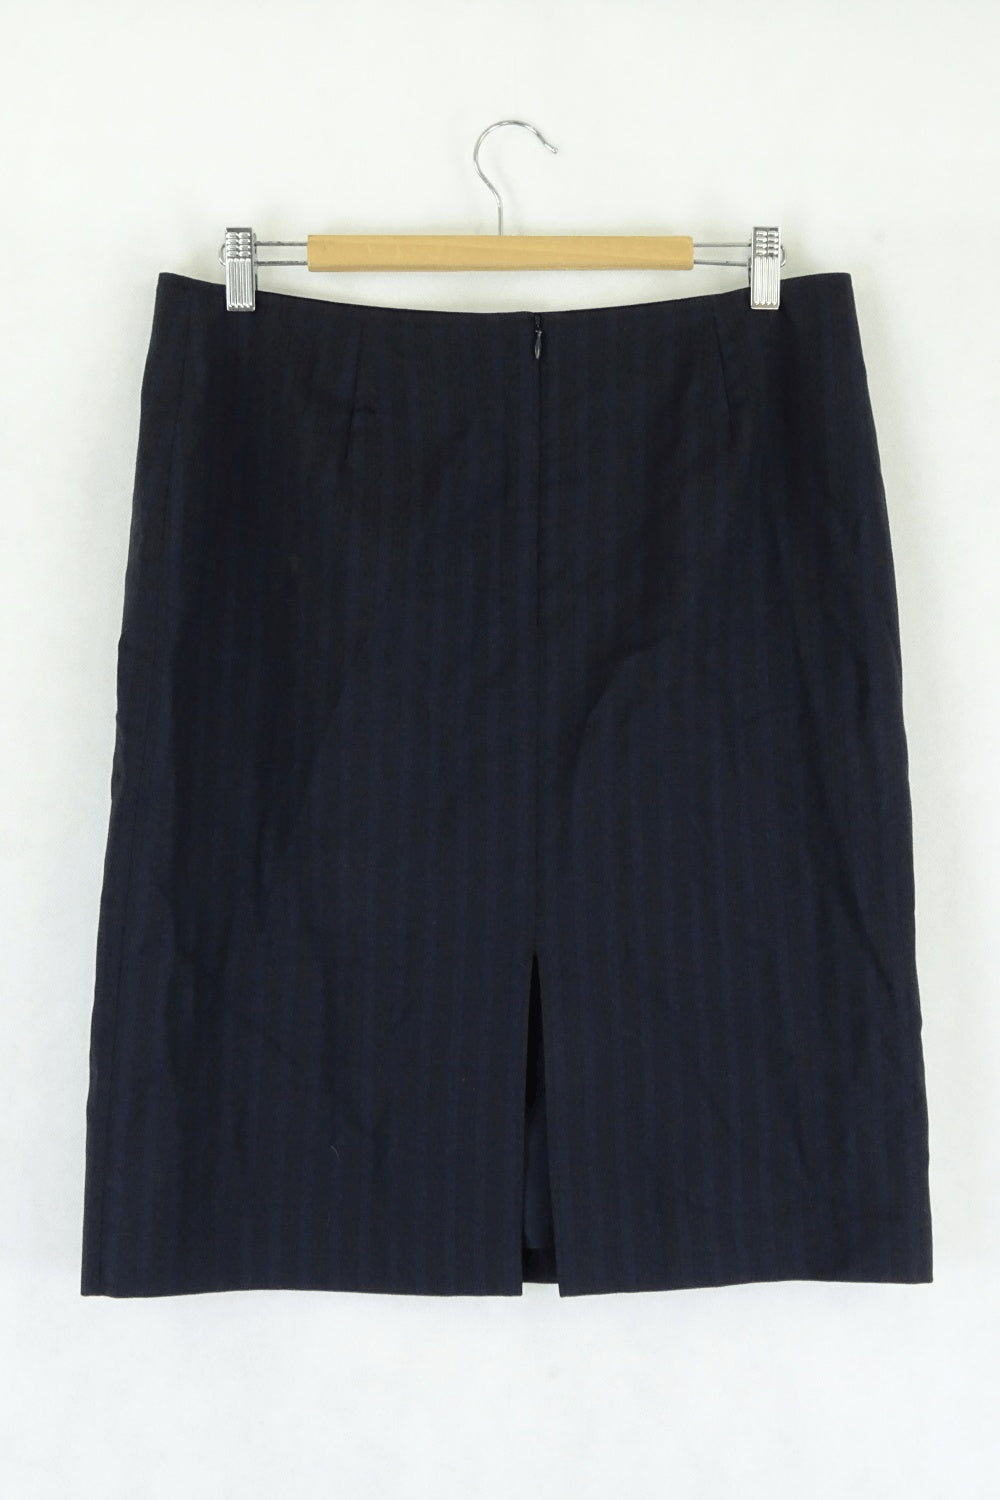 Country Road navy skirt 12